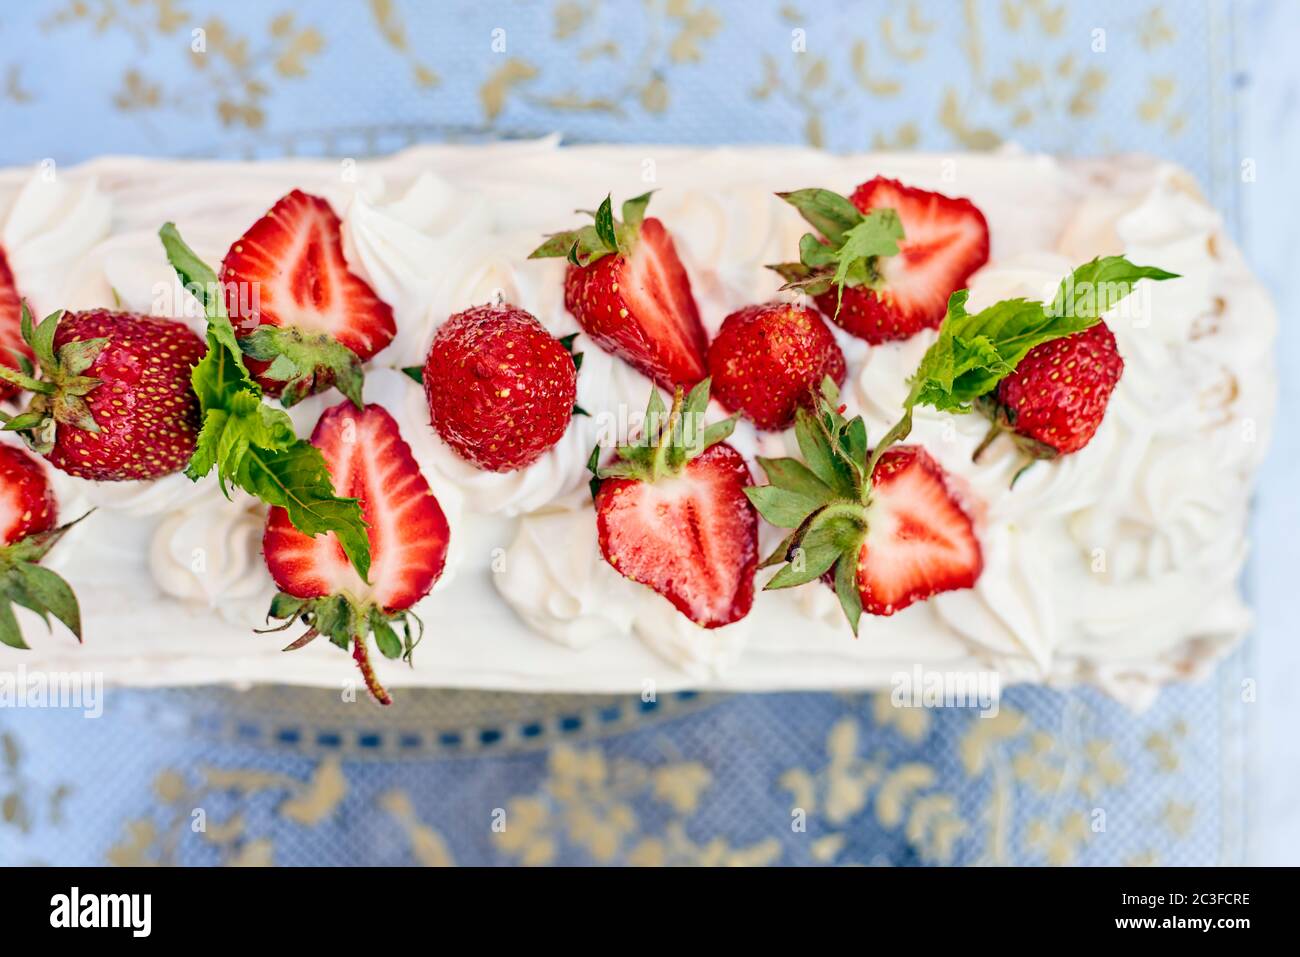 Freshly baked sweet strawberry Long-Cake Roll, also called Strawberry roulade Stock Photo